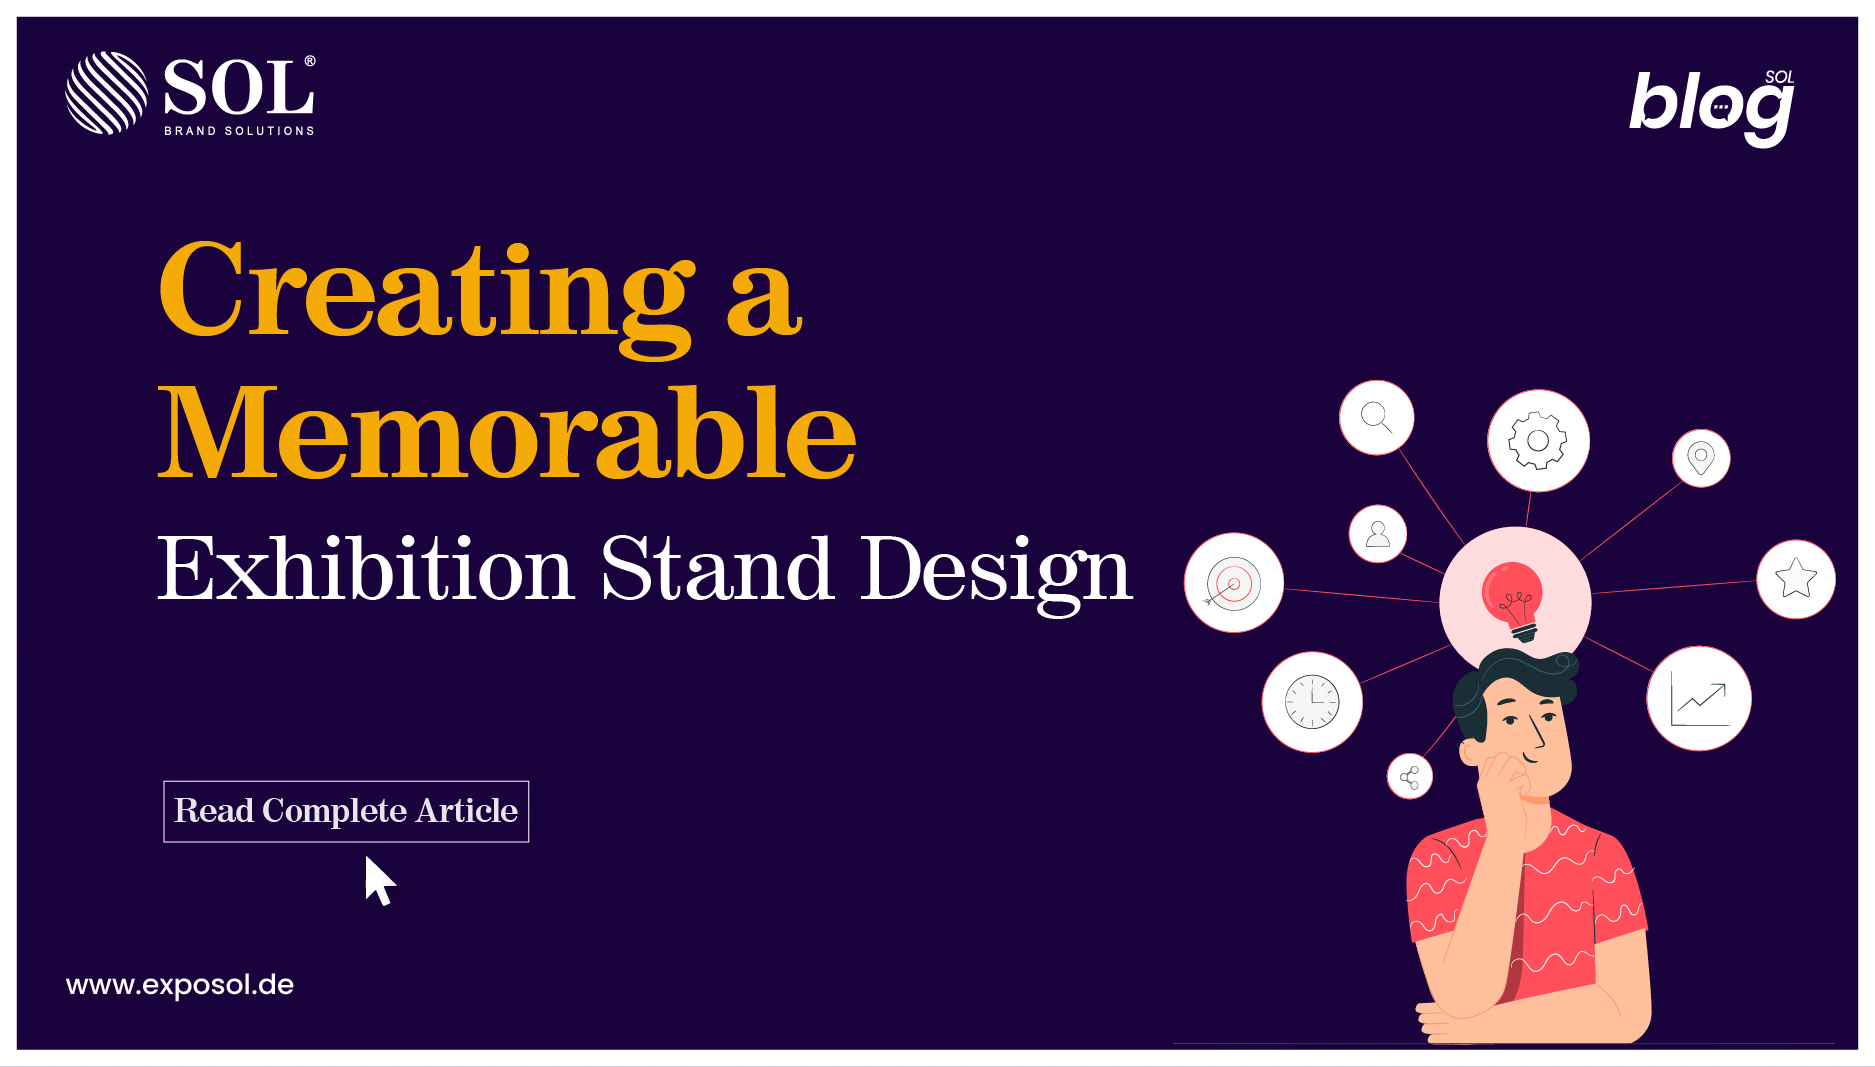 Questions You Should Ask Yourself Before Finalizing an Exhibition Stand Design